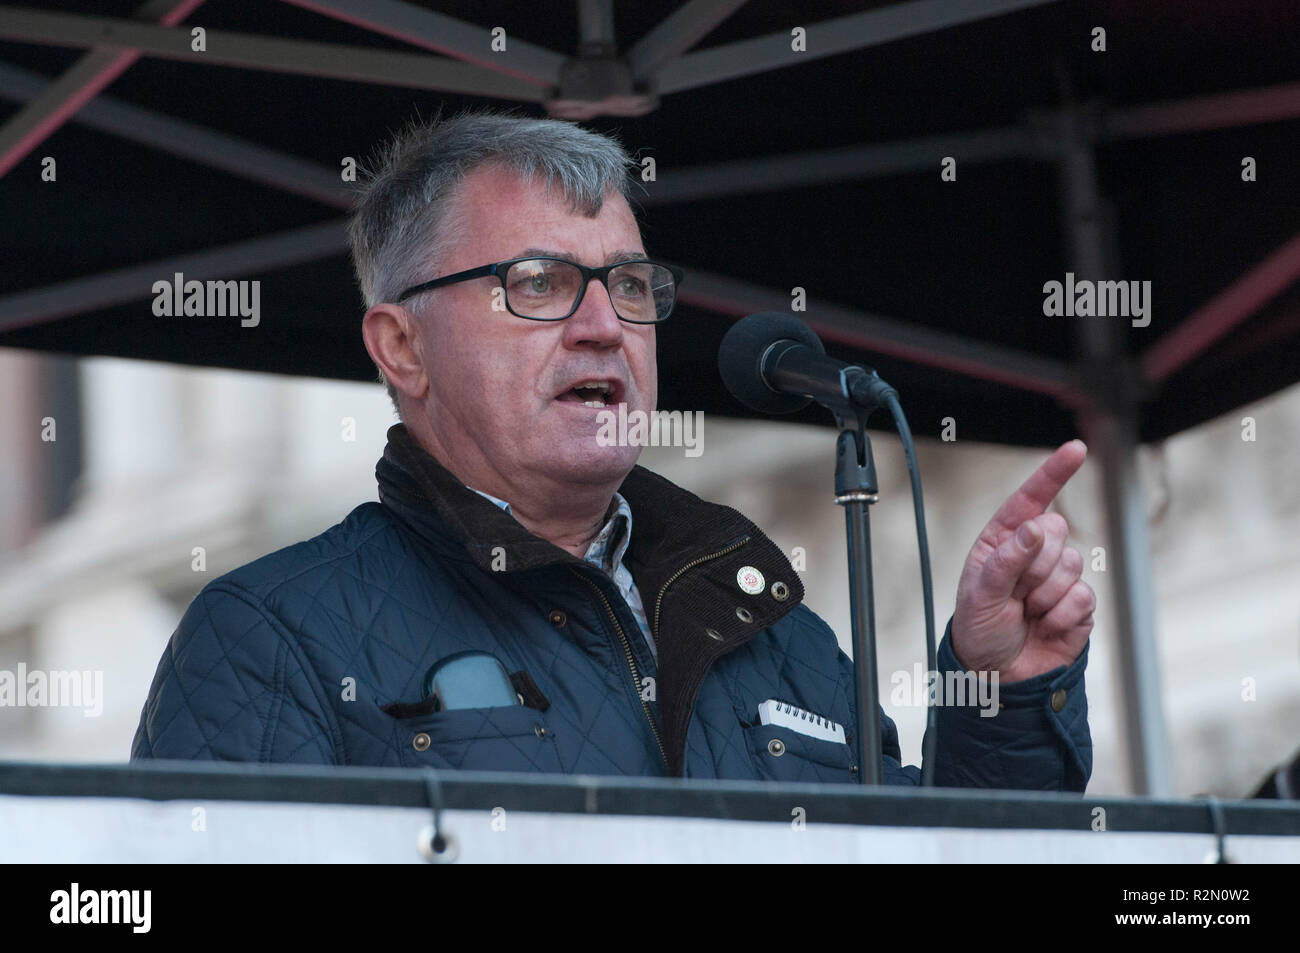 General Secretary of the National Union of Rail, Maritime and Transport Workers Mick Cash seen speaking during the protest. Huge crowds marched from the BBC in Portland Place to Whitehall with flags and placards during the National Unity Demonstration to oppose the rise of fascist and racist activity in Europe, The demonstration was called by Unite against Fascism, Love Music Hate Racism and Stand up to racism movements. The speeches in Whitehall were disrupted by the presence of a small number of far right activists and Trump supporters. Stock Photo